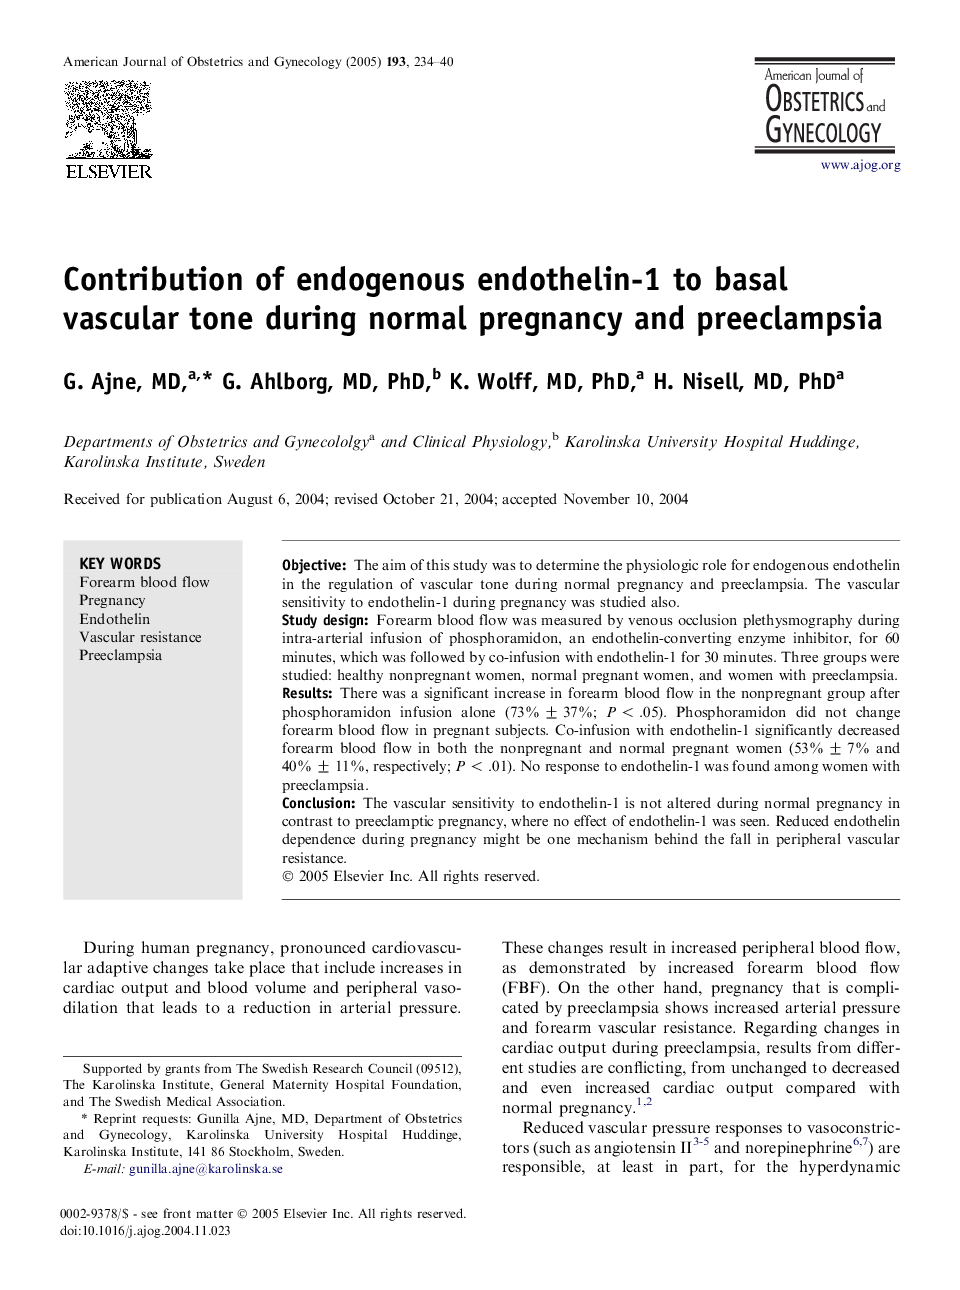 Contribution of endogenous endothelin-1 to basal vascular tone during normal pregnancy and preeclampsia